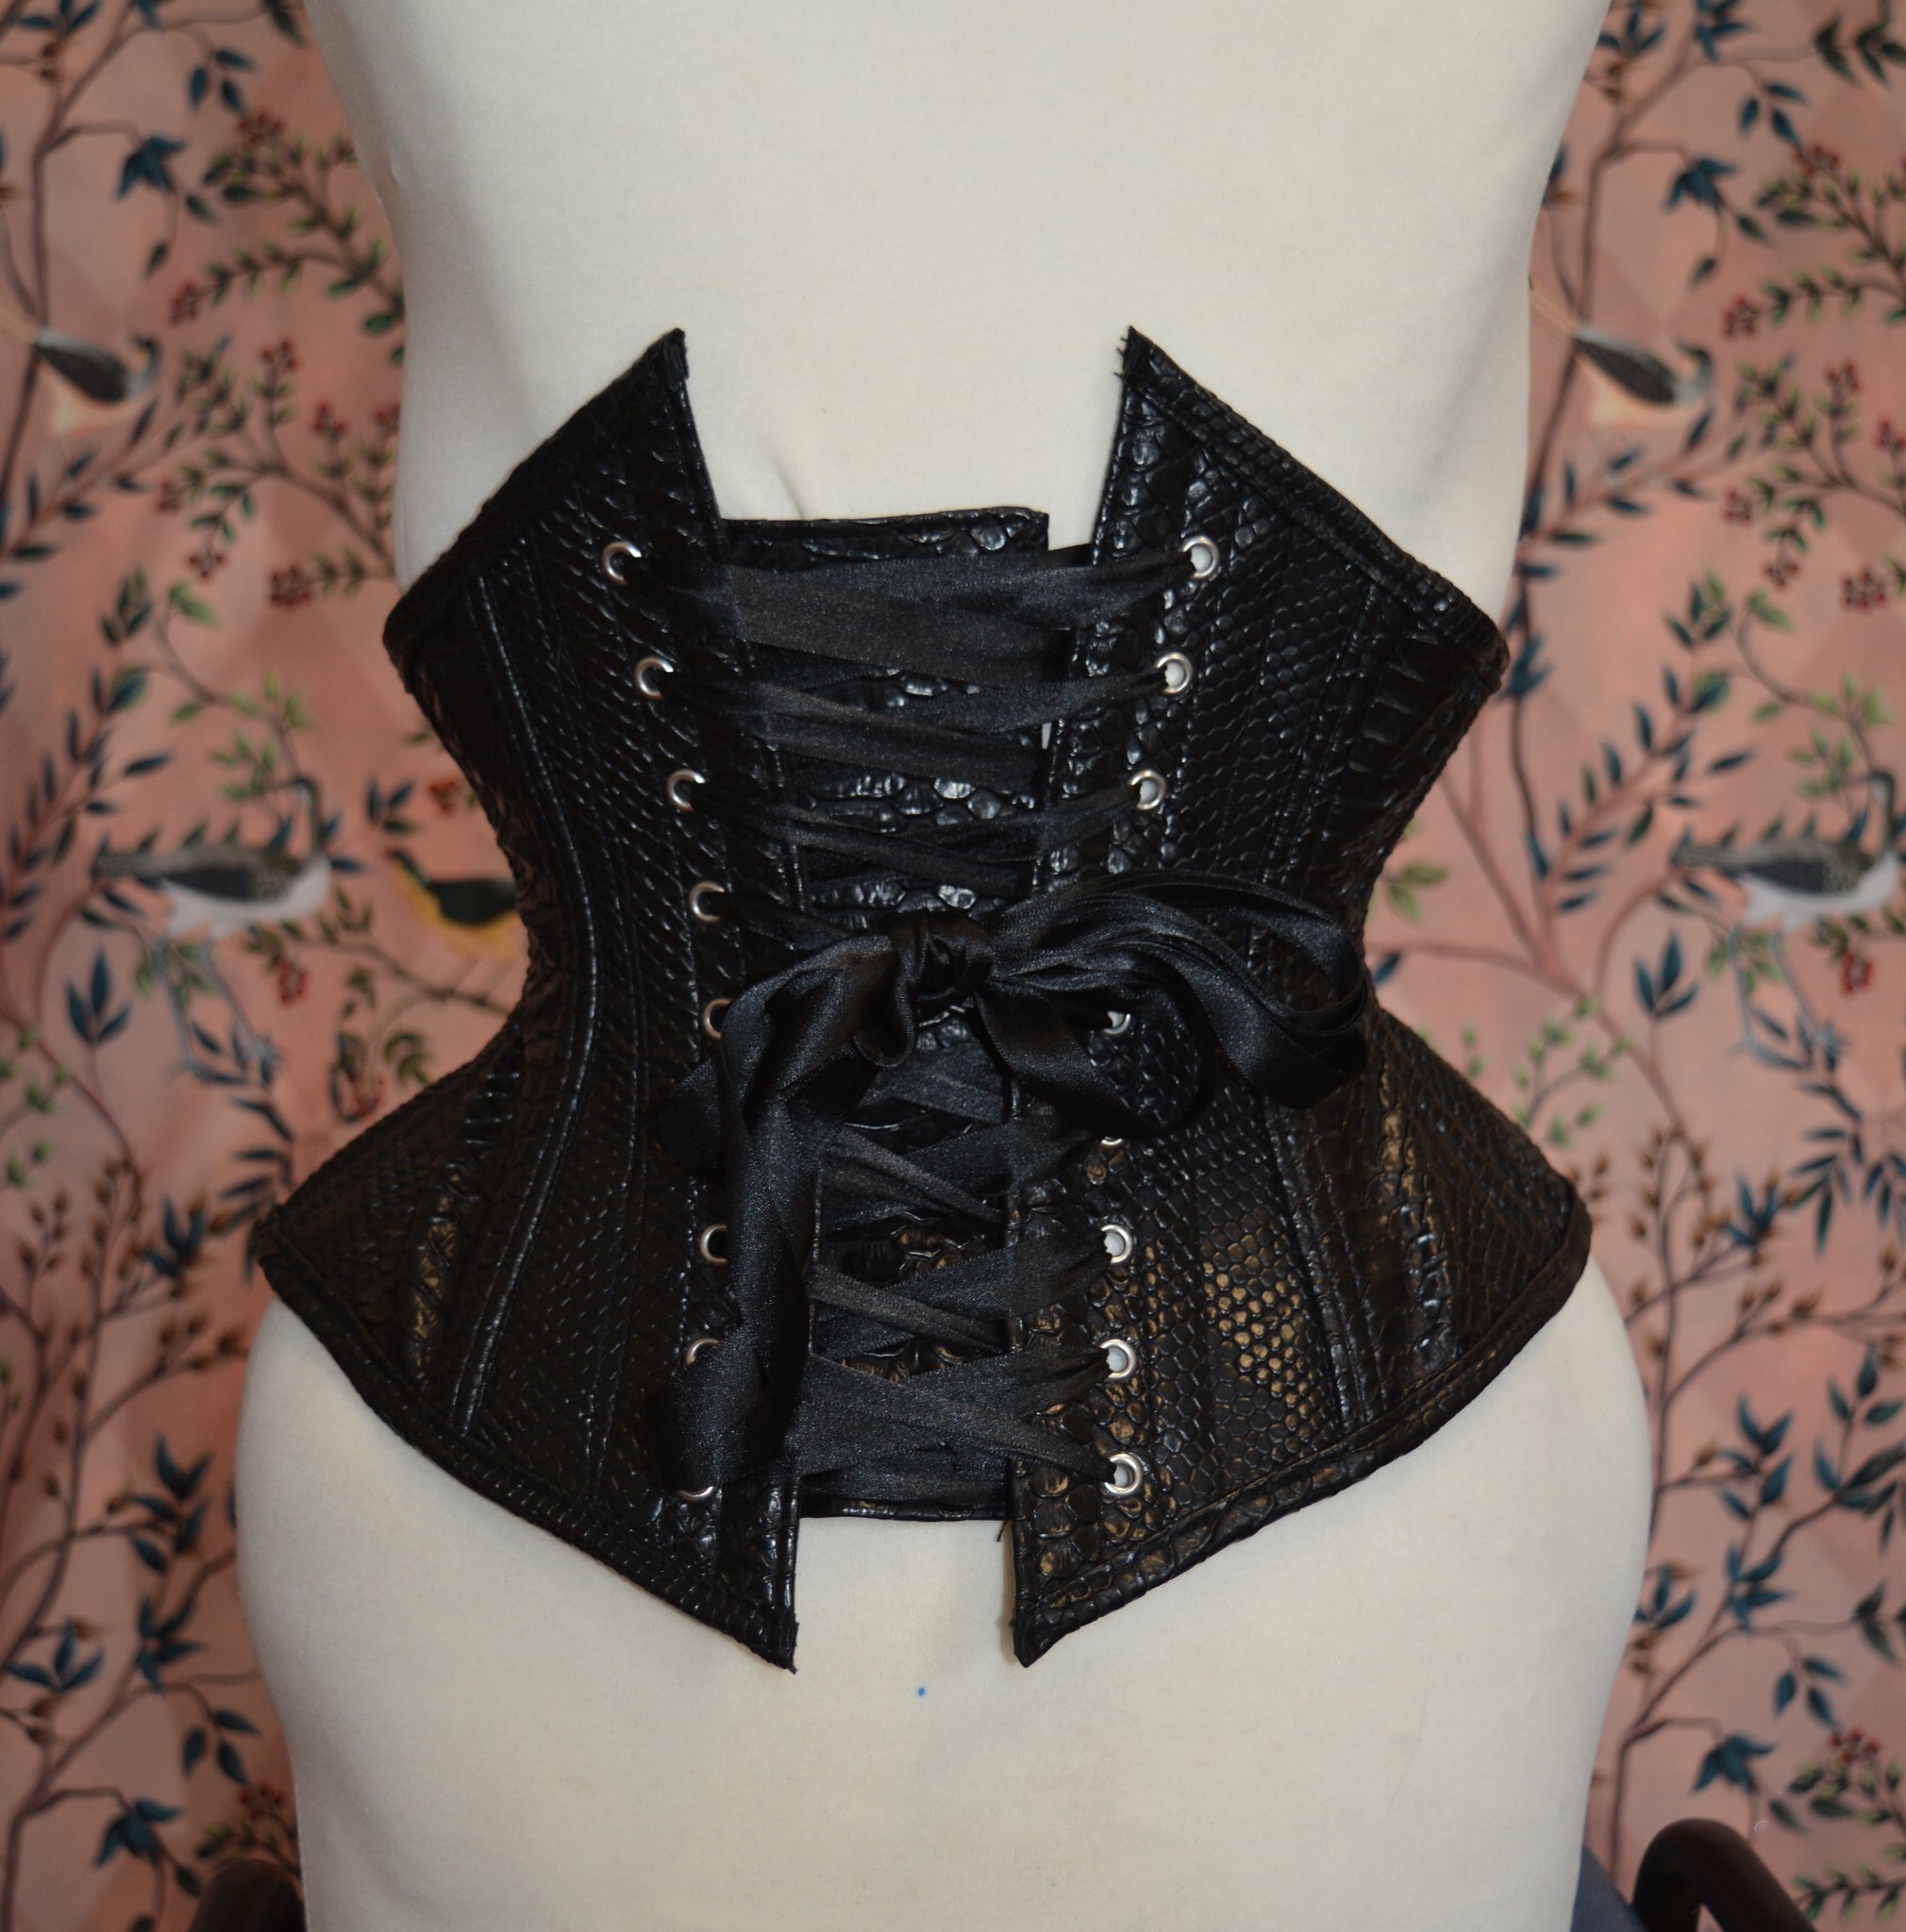 Waspie Corsets: What Makes a Corset Waspie?